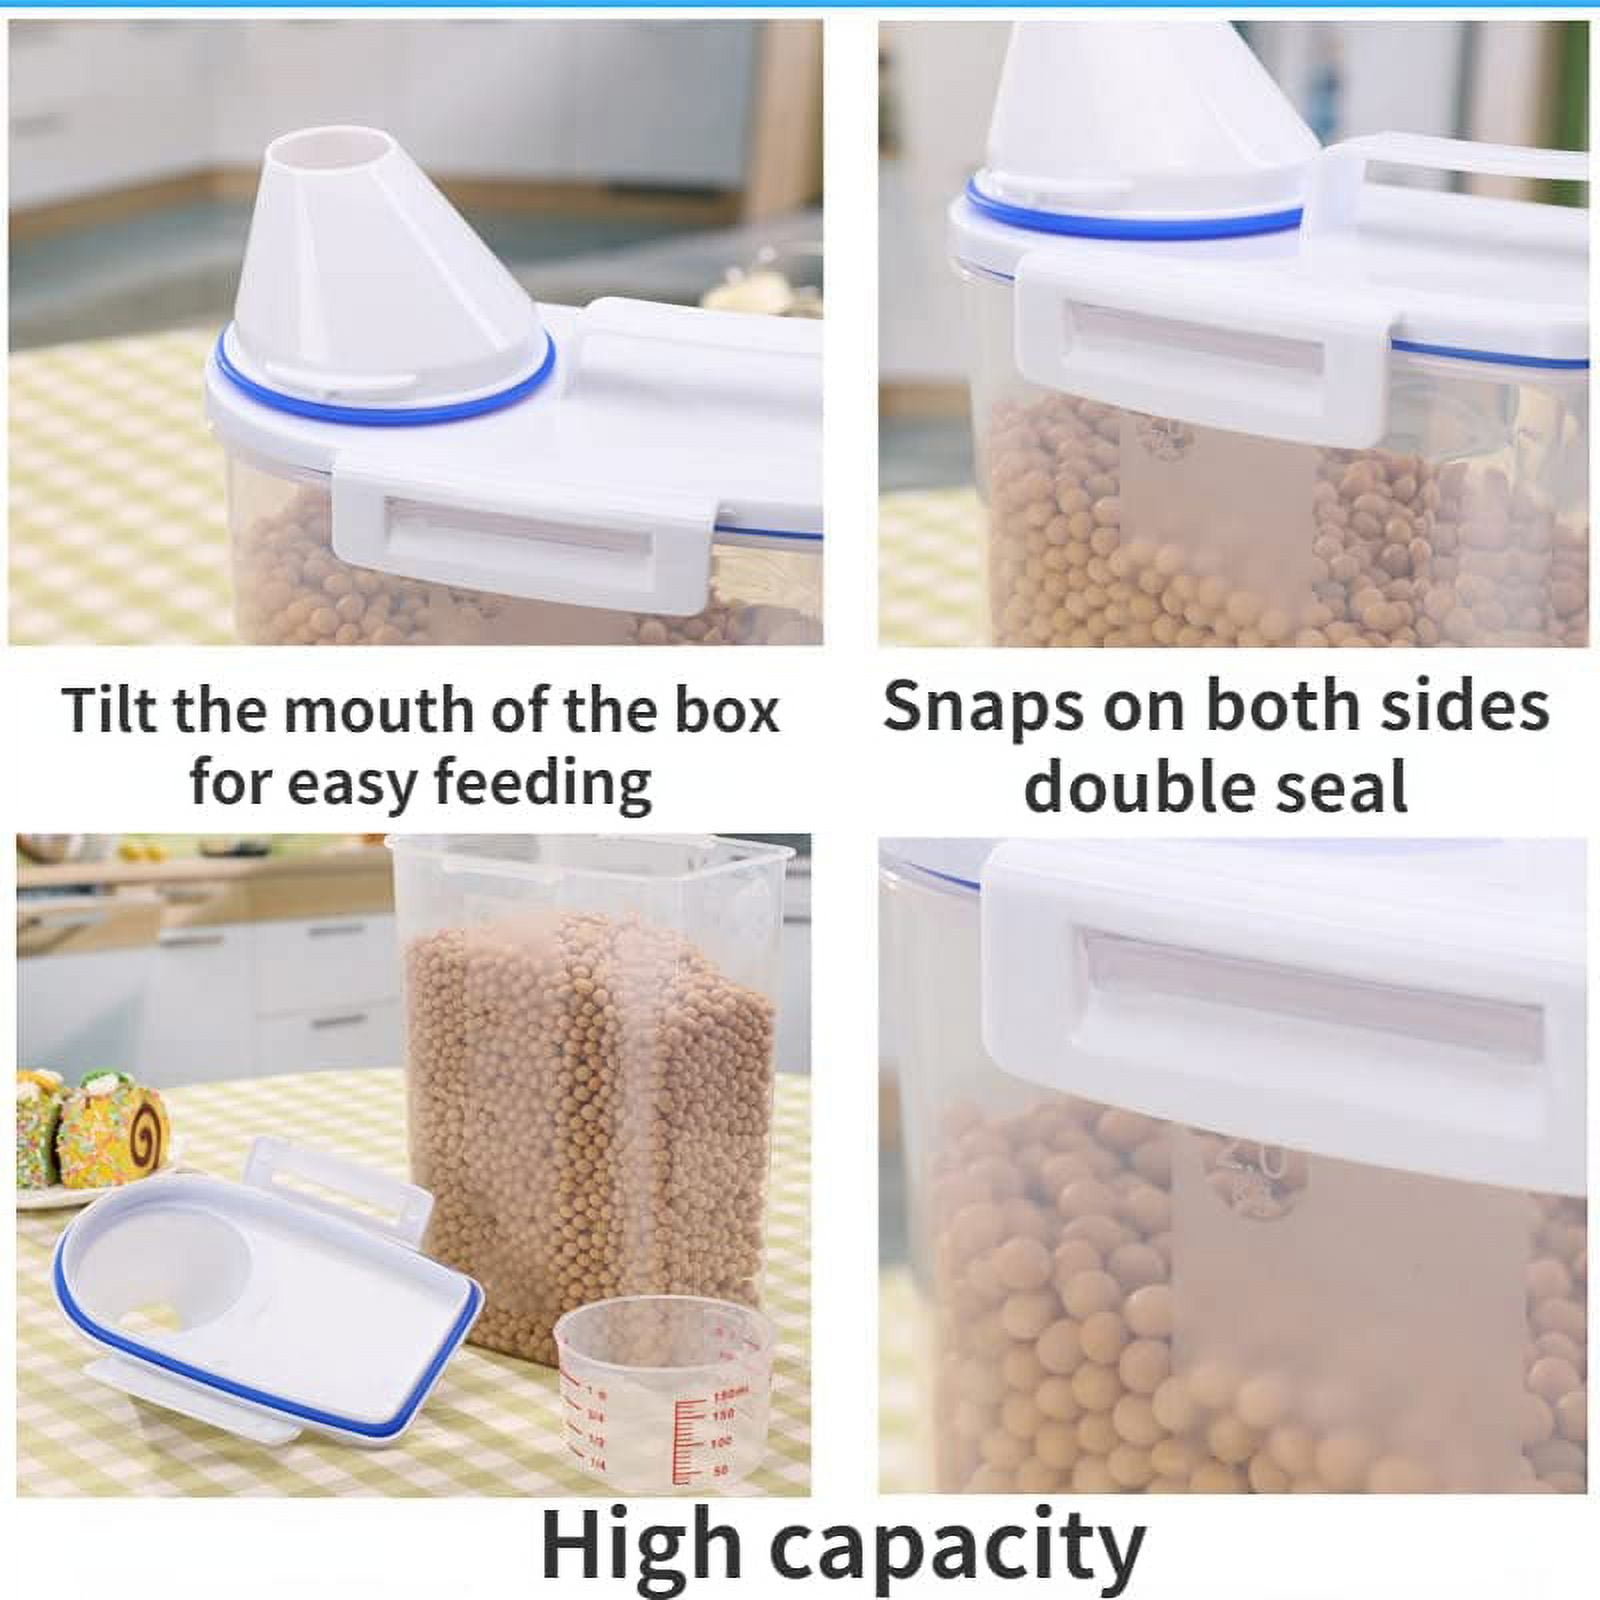 Basicwise Wide Mouth Plastic BPA-Free Reusable Rice Dispenser